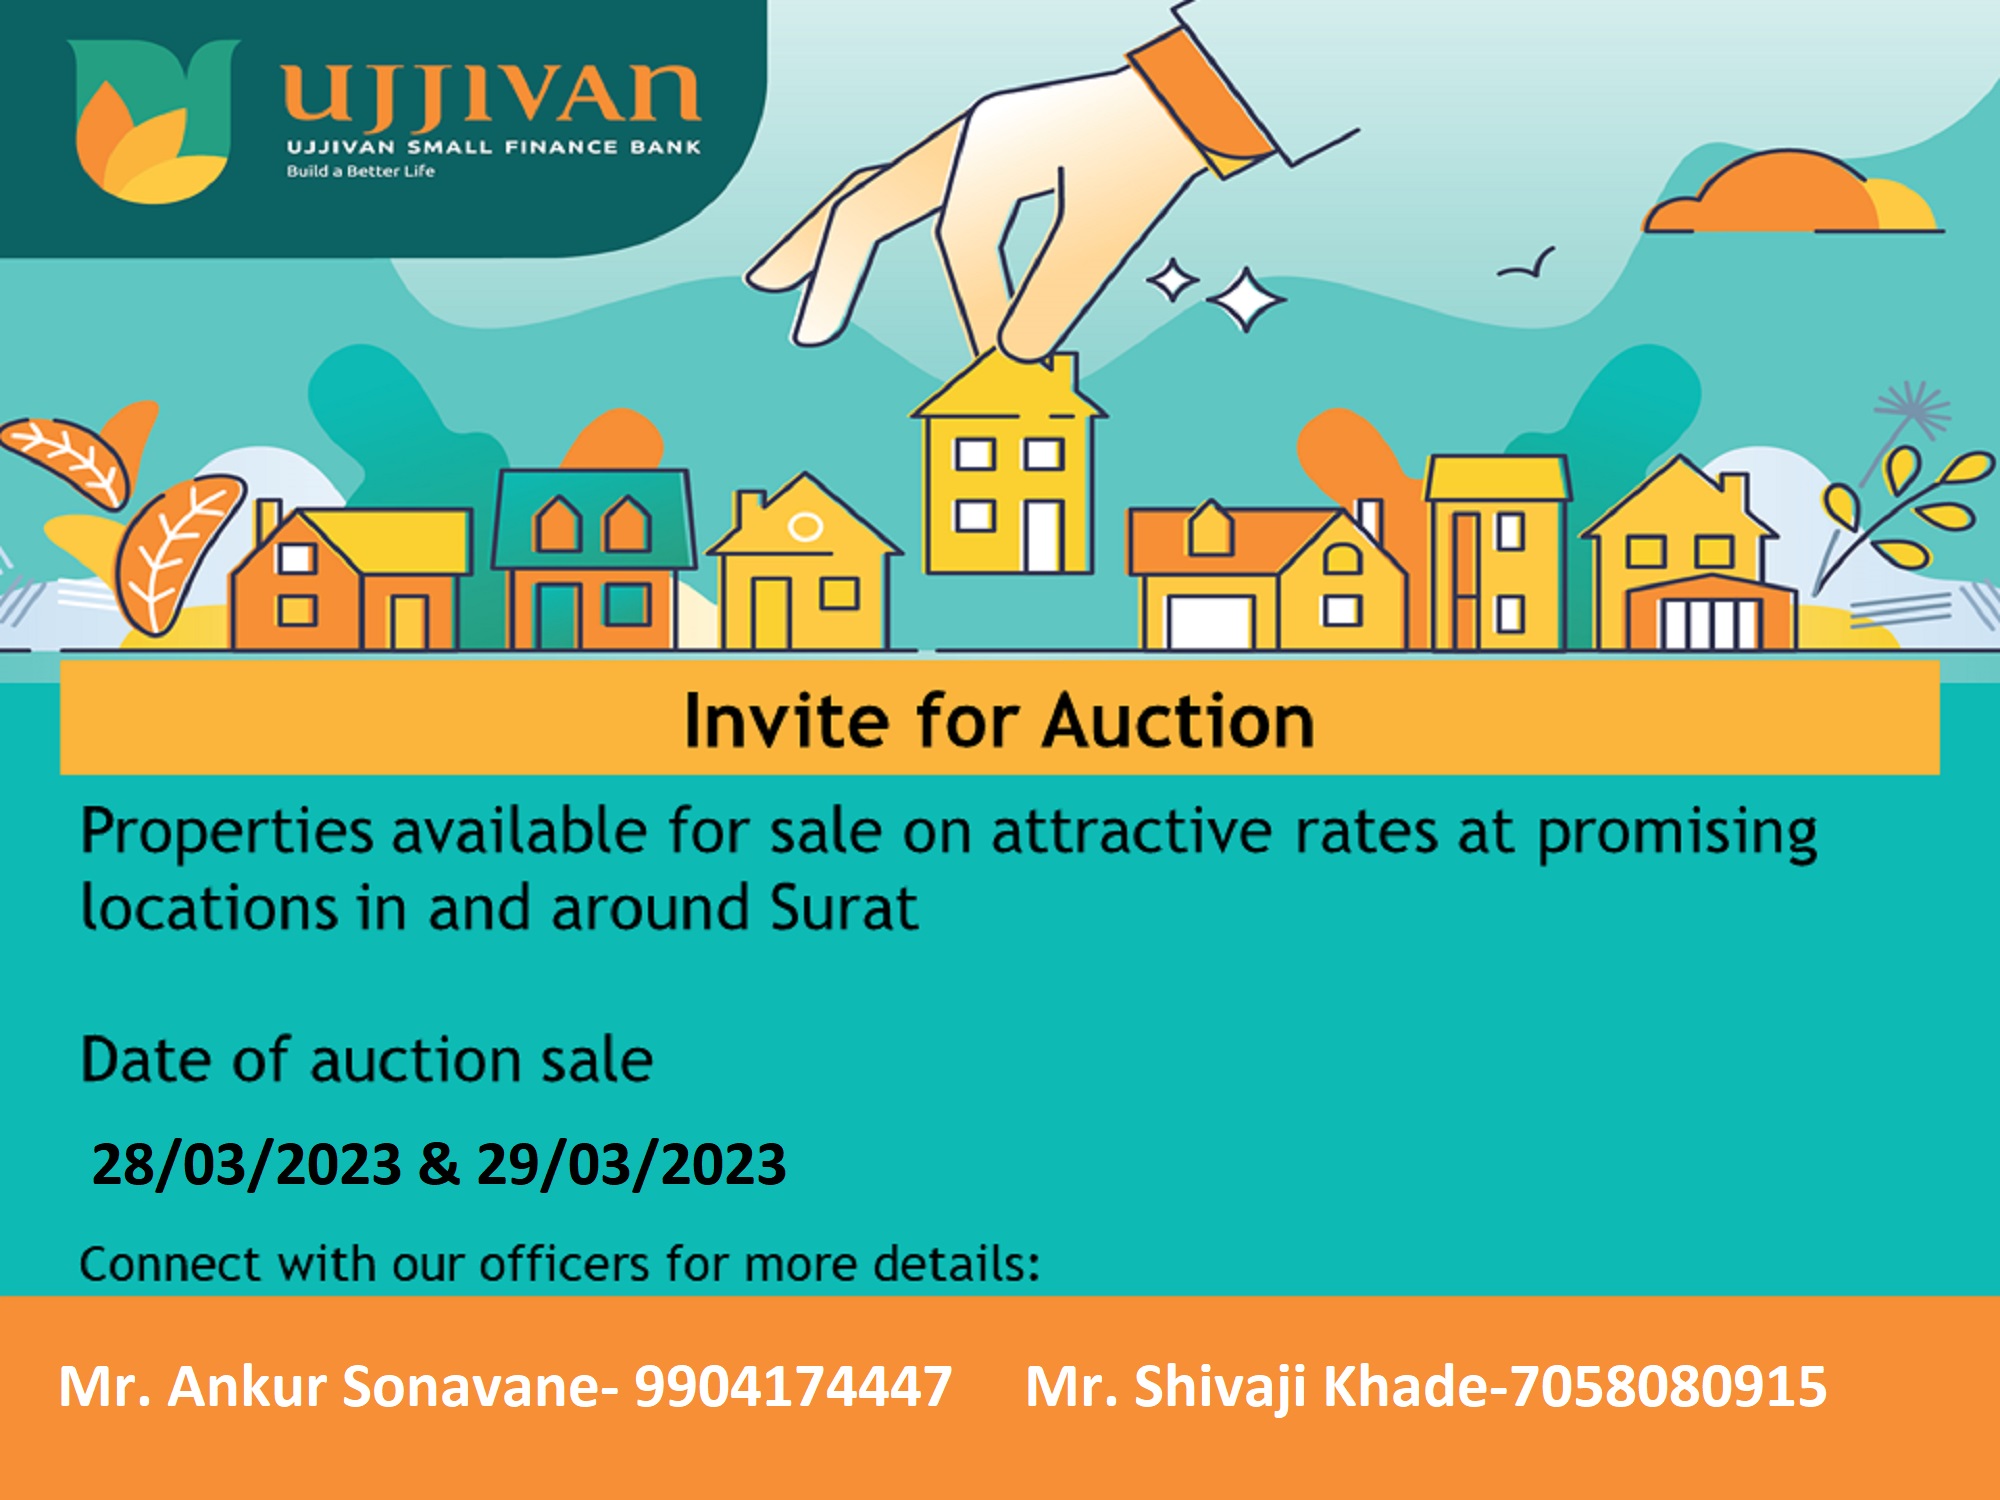 Invite for auction